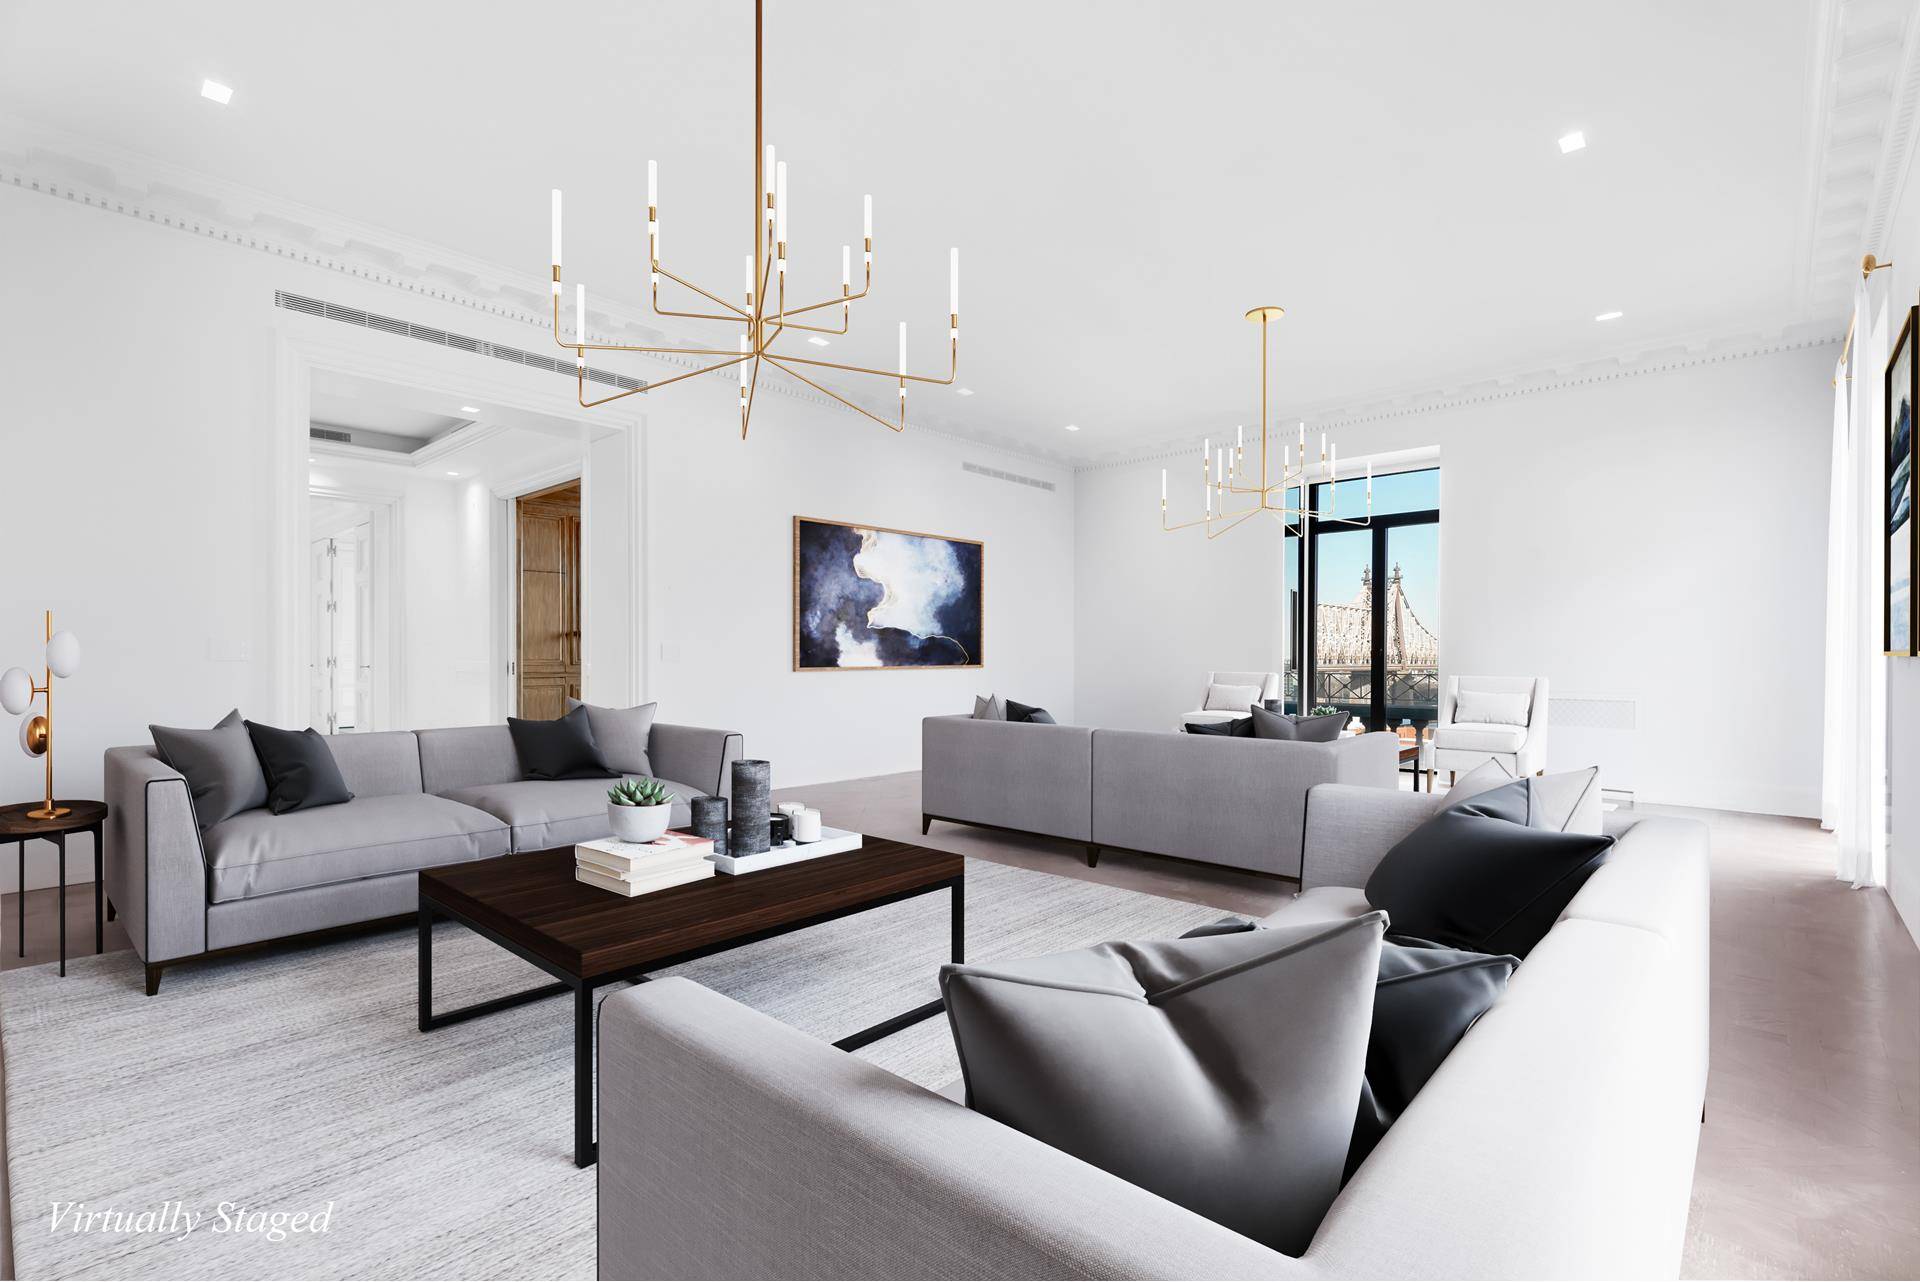 These two full floor apartments have been meticulously combined to create an opulent duplex that will satisfy those with a discerning eye.